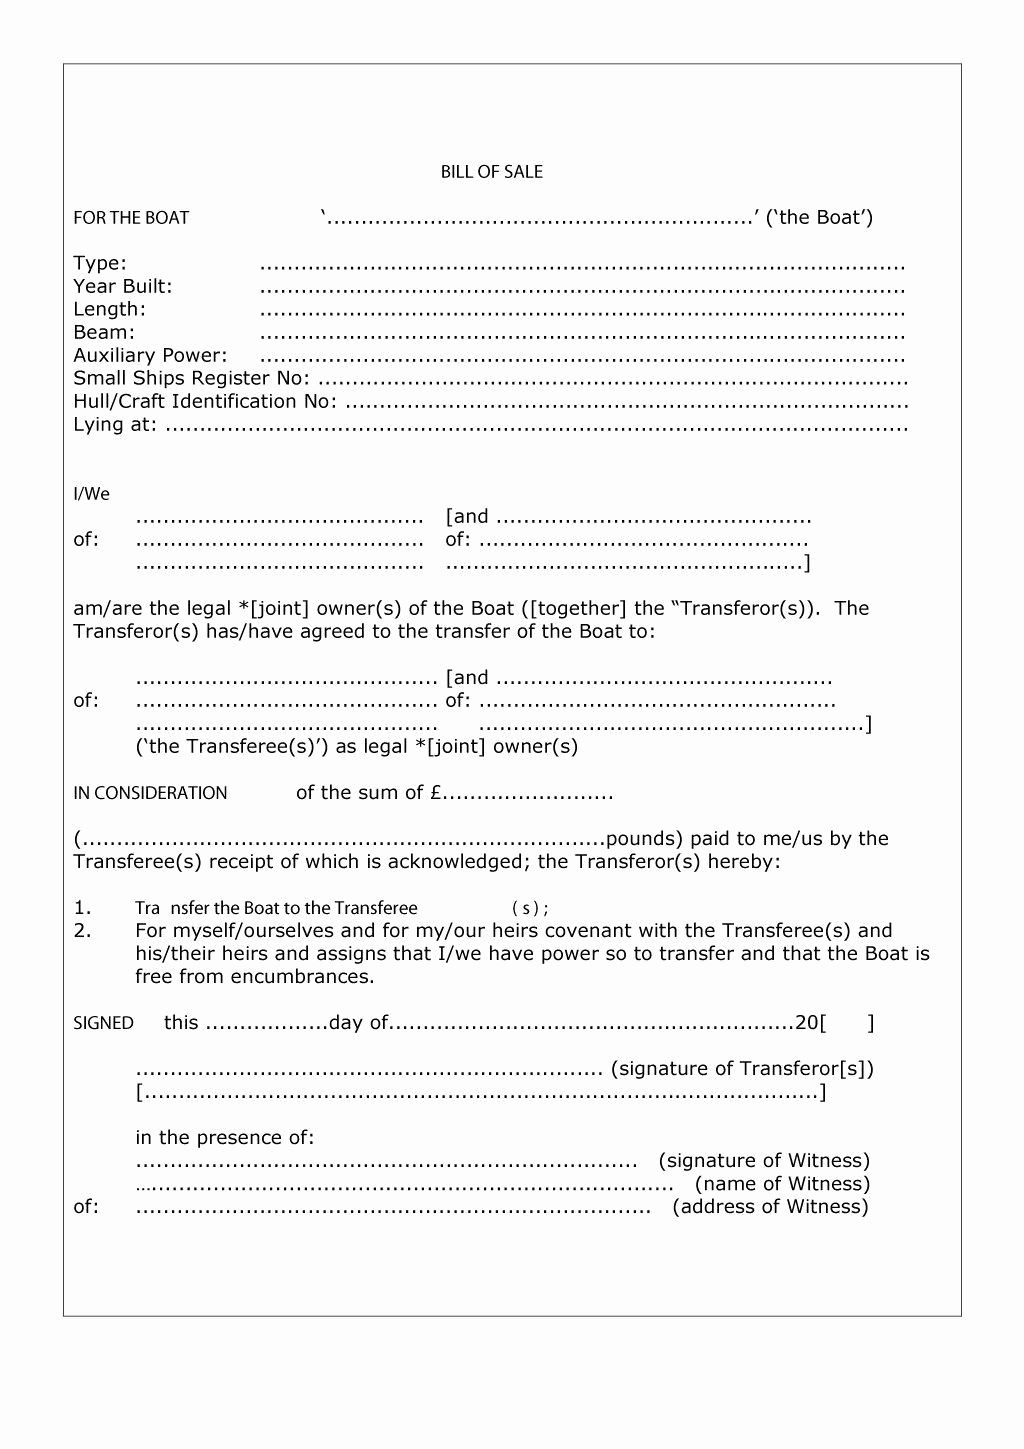 Bill Of Sale Template Free Lovely 46 Fee Printable Bill Of Sale Templates Car Boat Gun